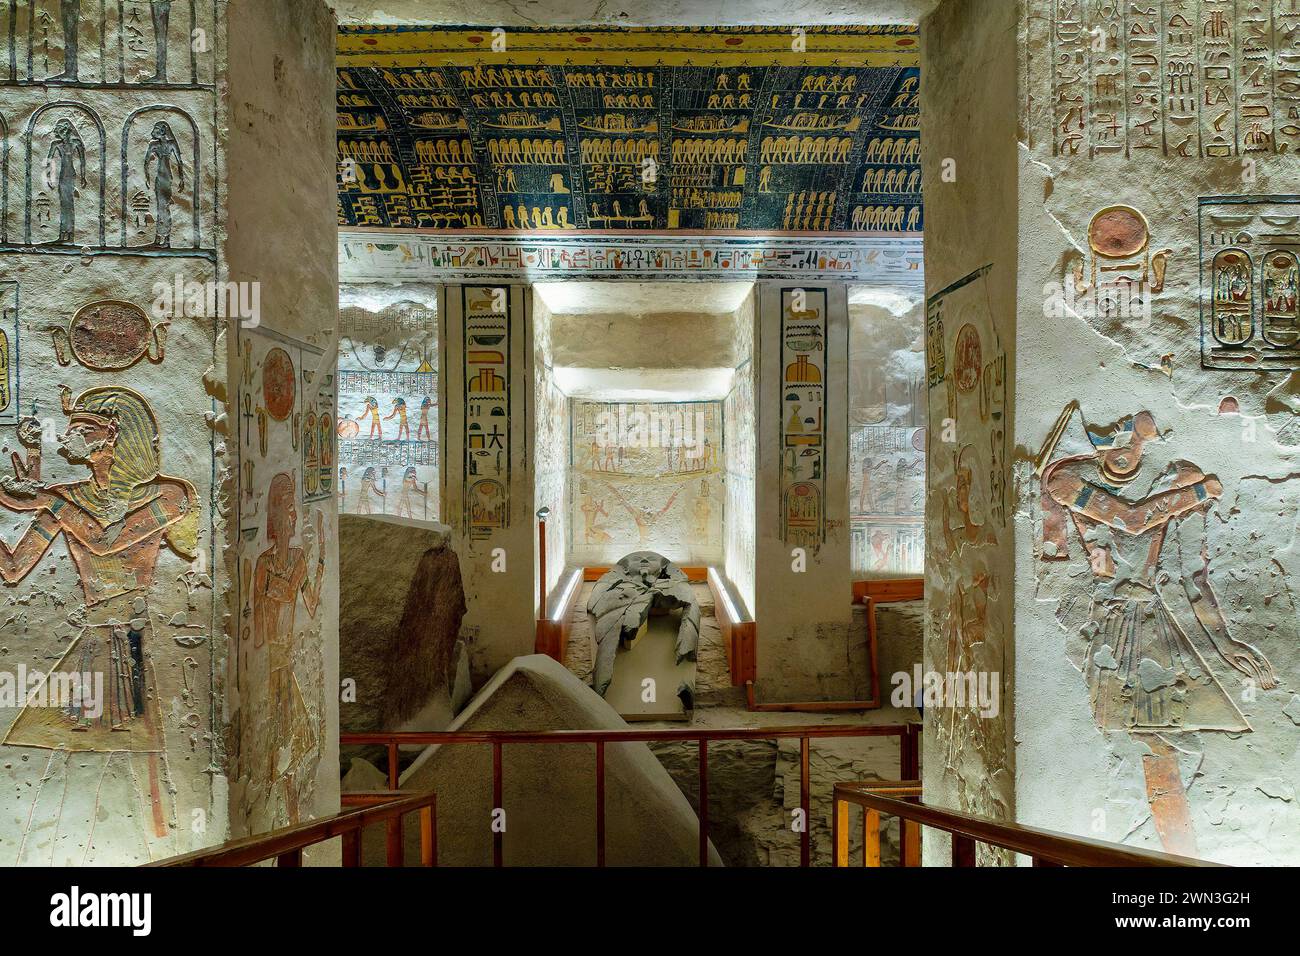 Sarcophagus and painted room in Ramses V and VI (Rameses V and VI) tomb in the Valley of the Kings, Luxor West bank, Egypt Stock Photo